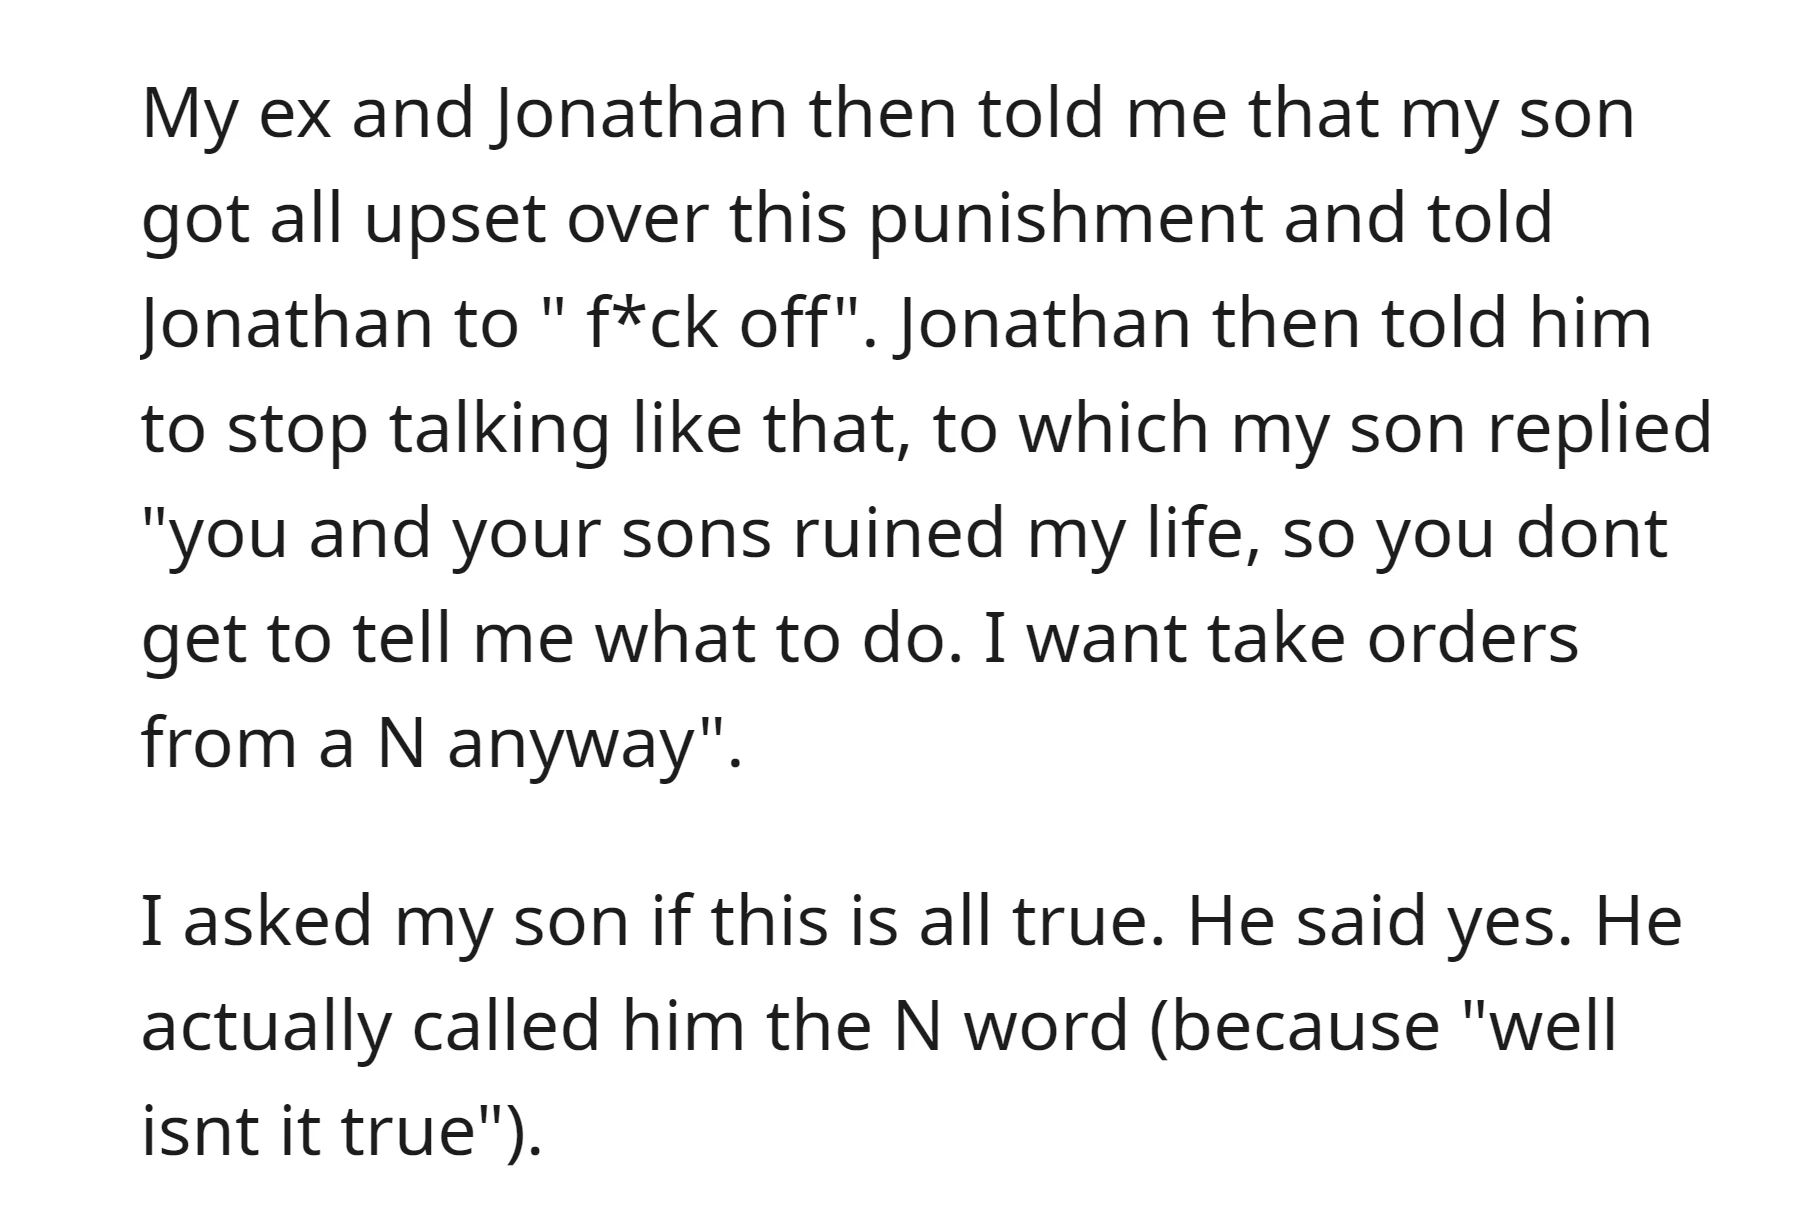 His son used offensive language including racial slurs towards Jonathan